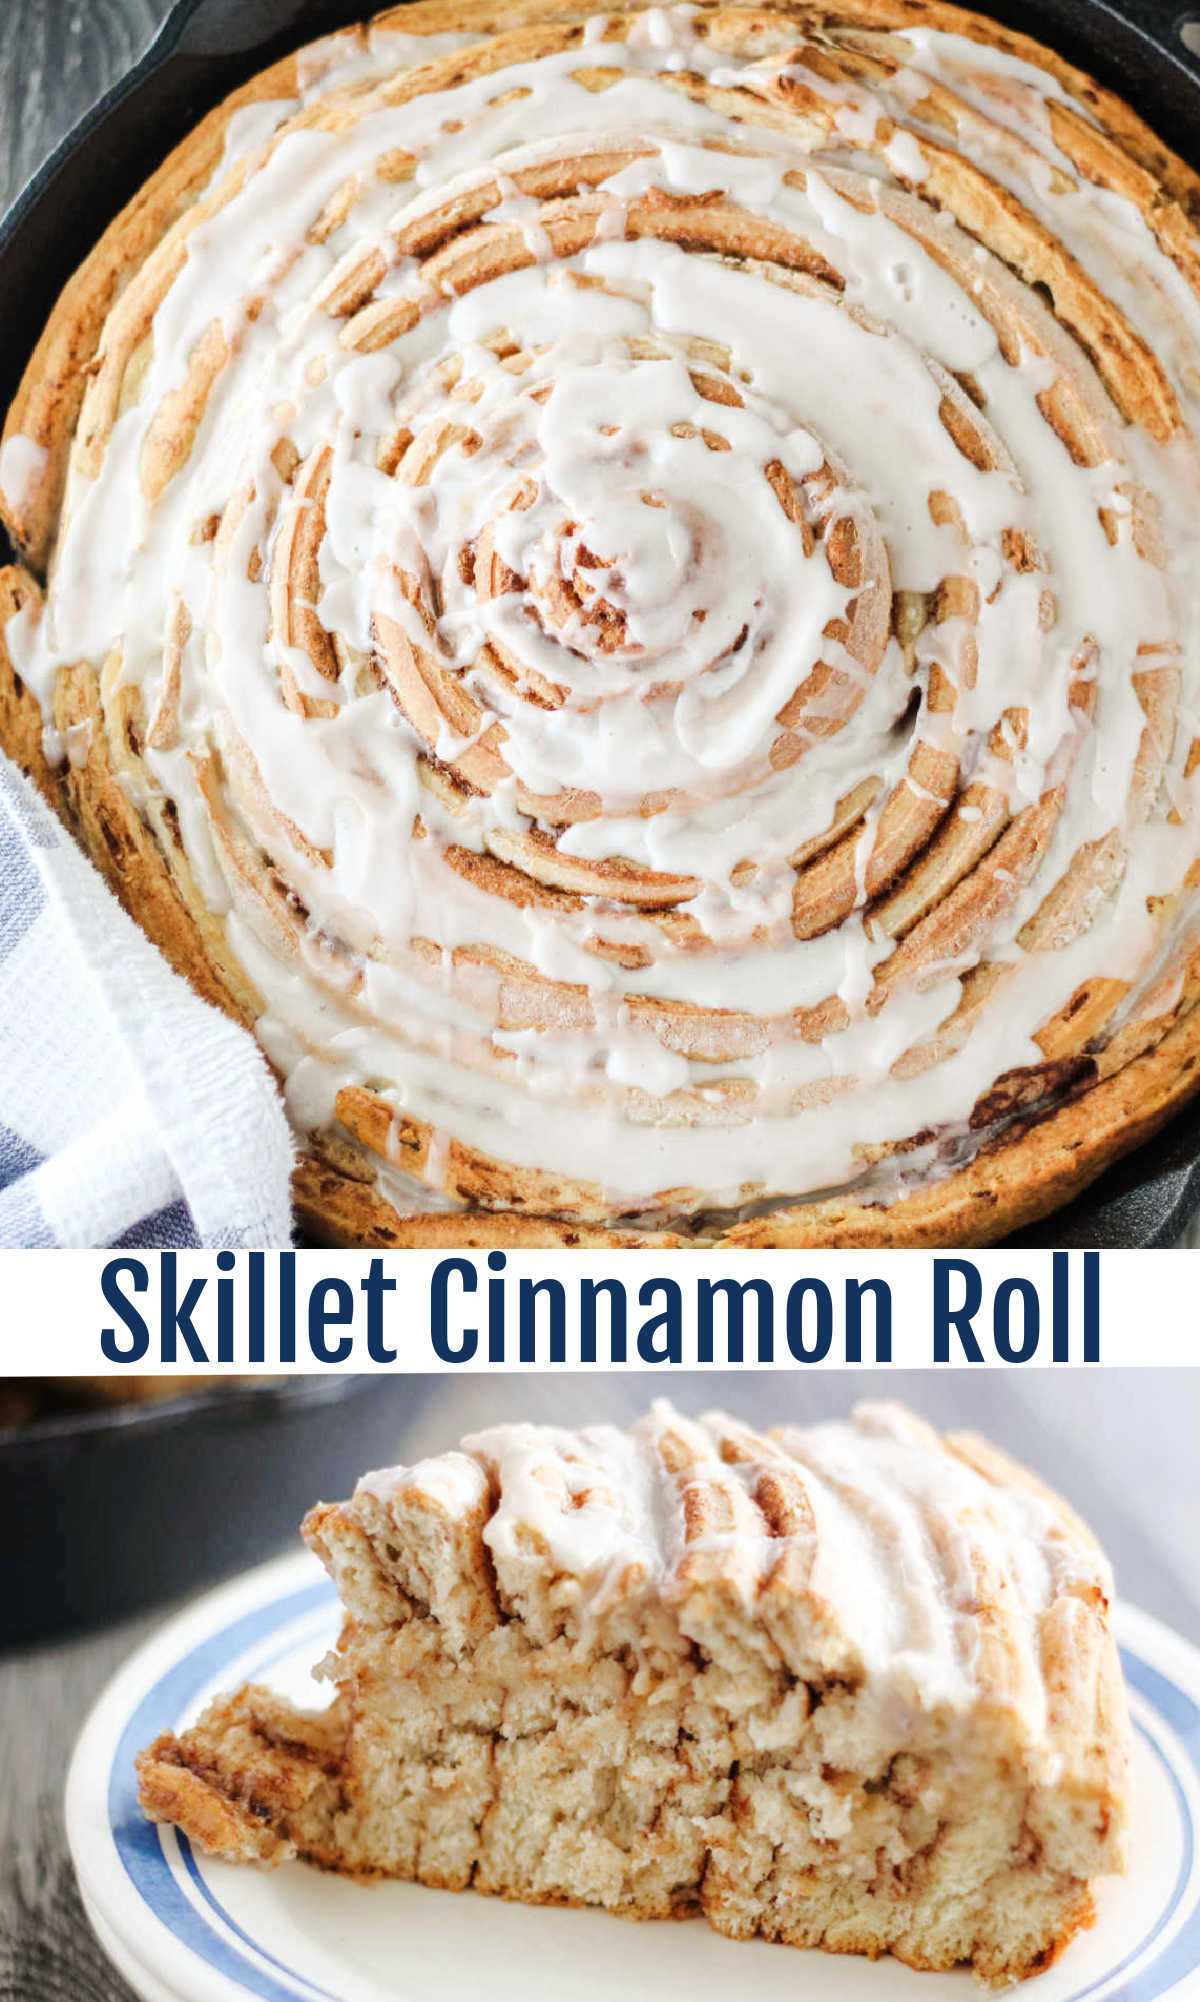 A giant skillet sized cinnamon roll is a perfect way to serve breakfast or brunch.  Cut a small sliver or a big slice and you still get all of the layers in whatever serving size you choose.